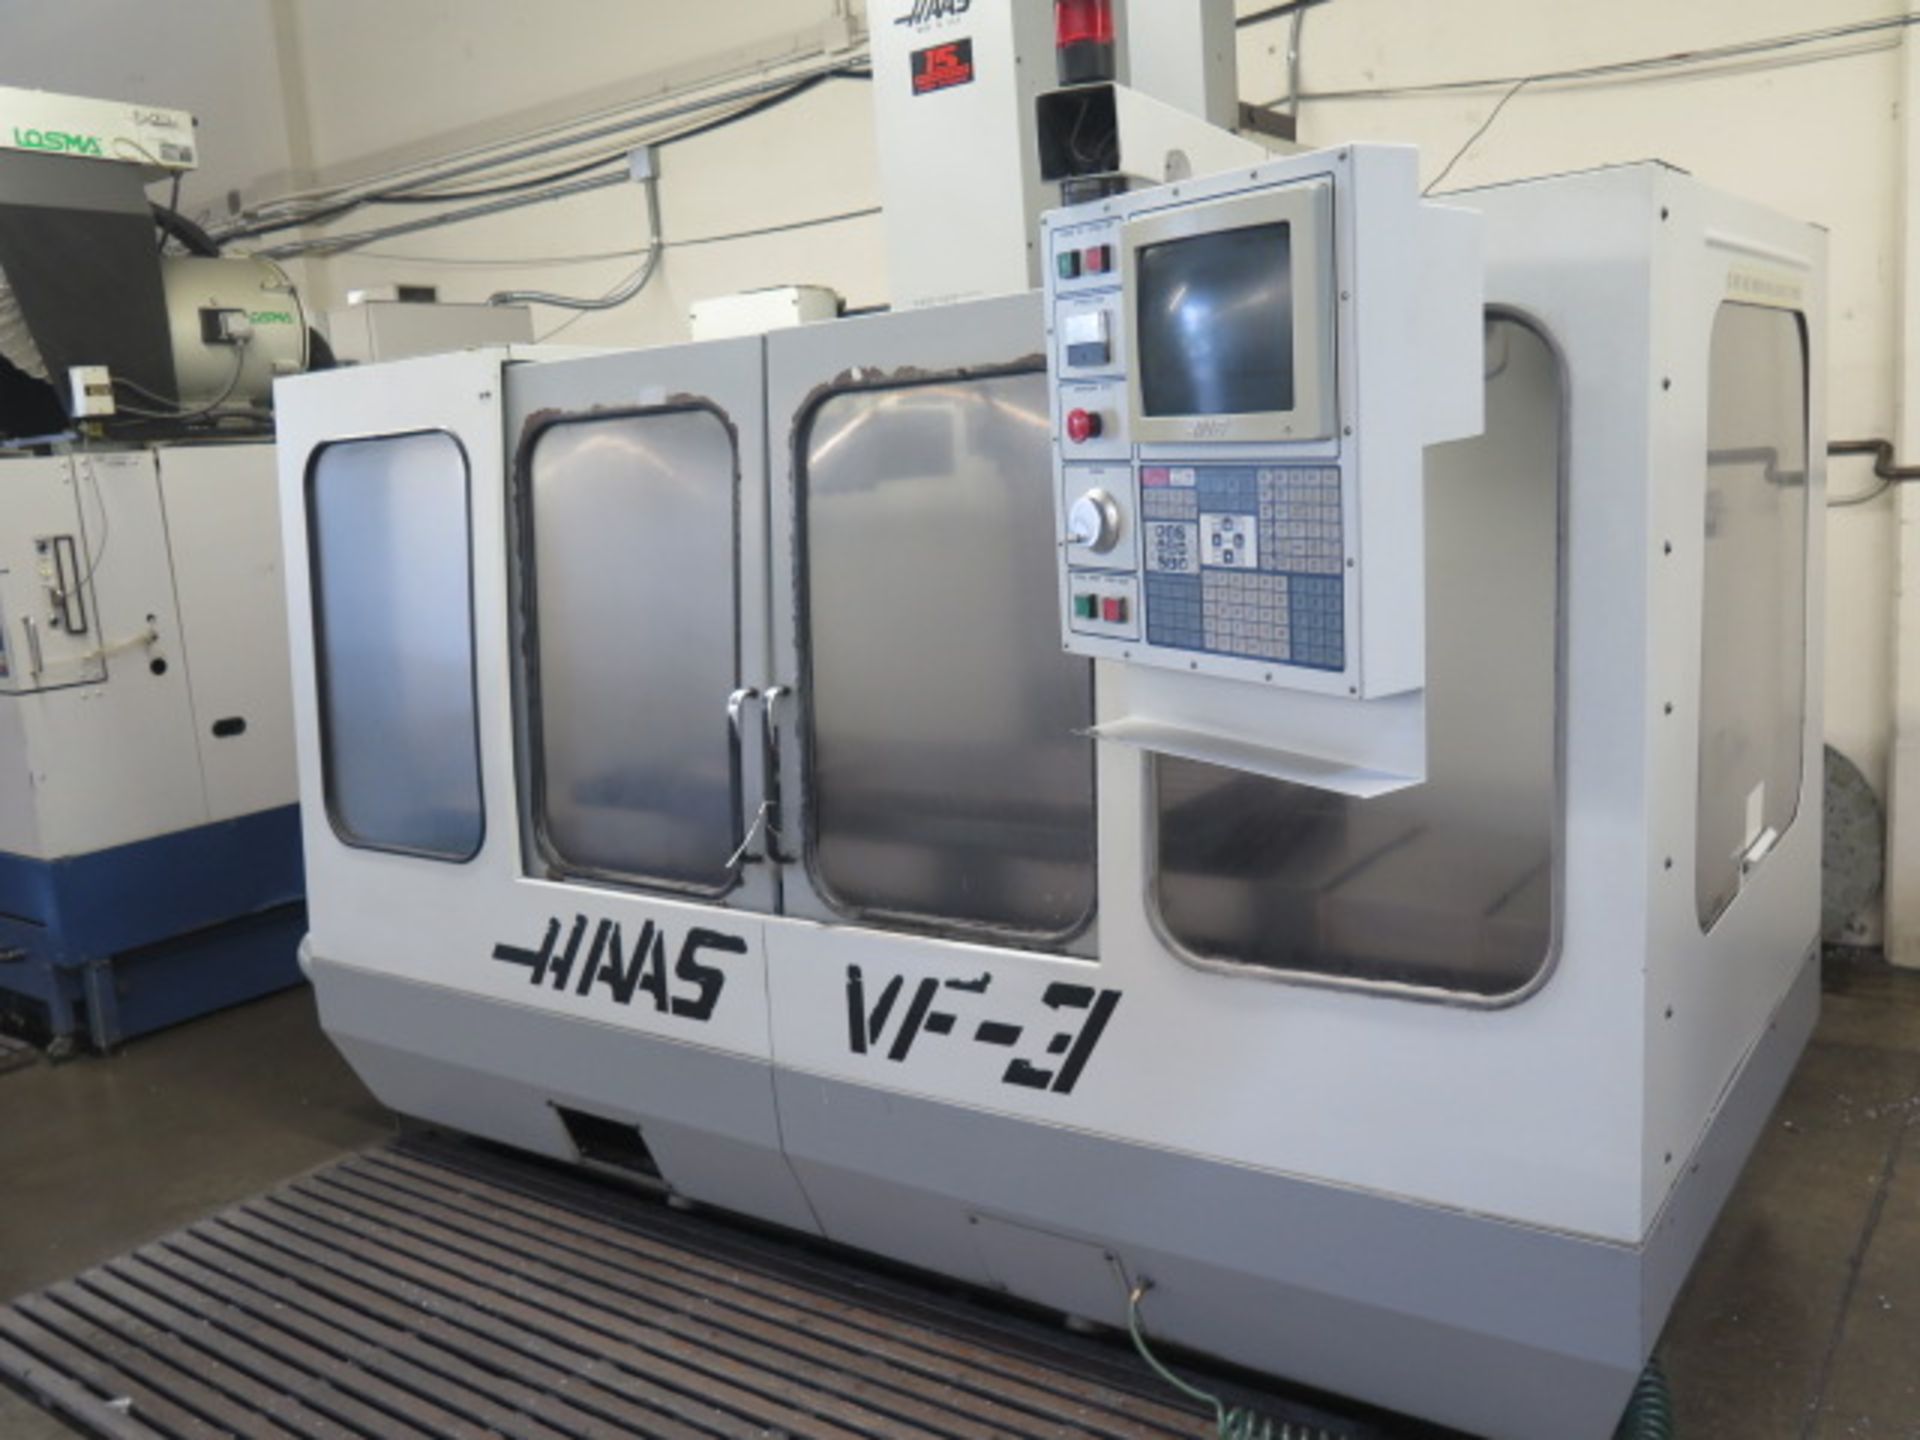 1994 Haas VF-3 4-Axis CNC Vertical Machining Center s/n 83515 w/ Haas Controls, 20-Station ATC, BT- - Image 3 of 12